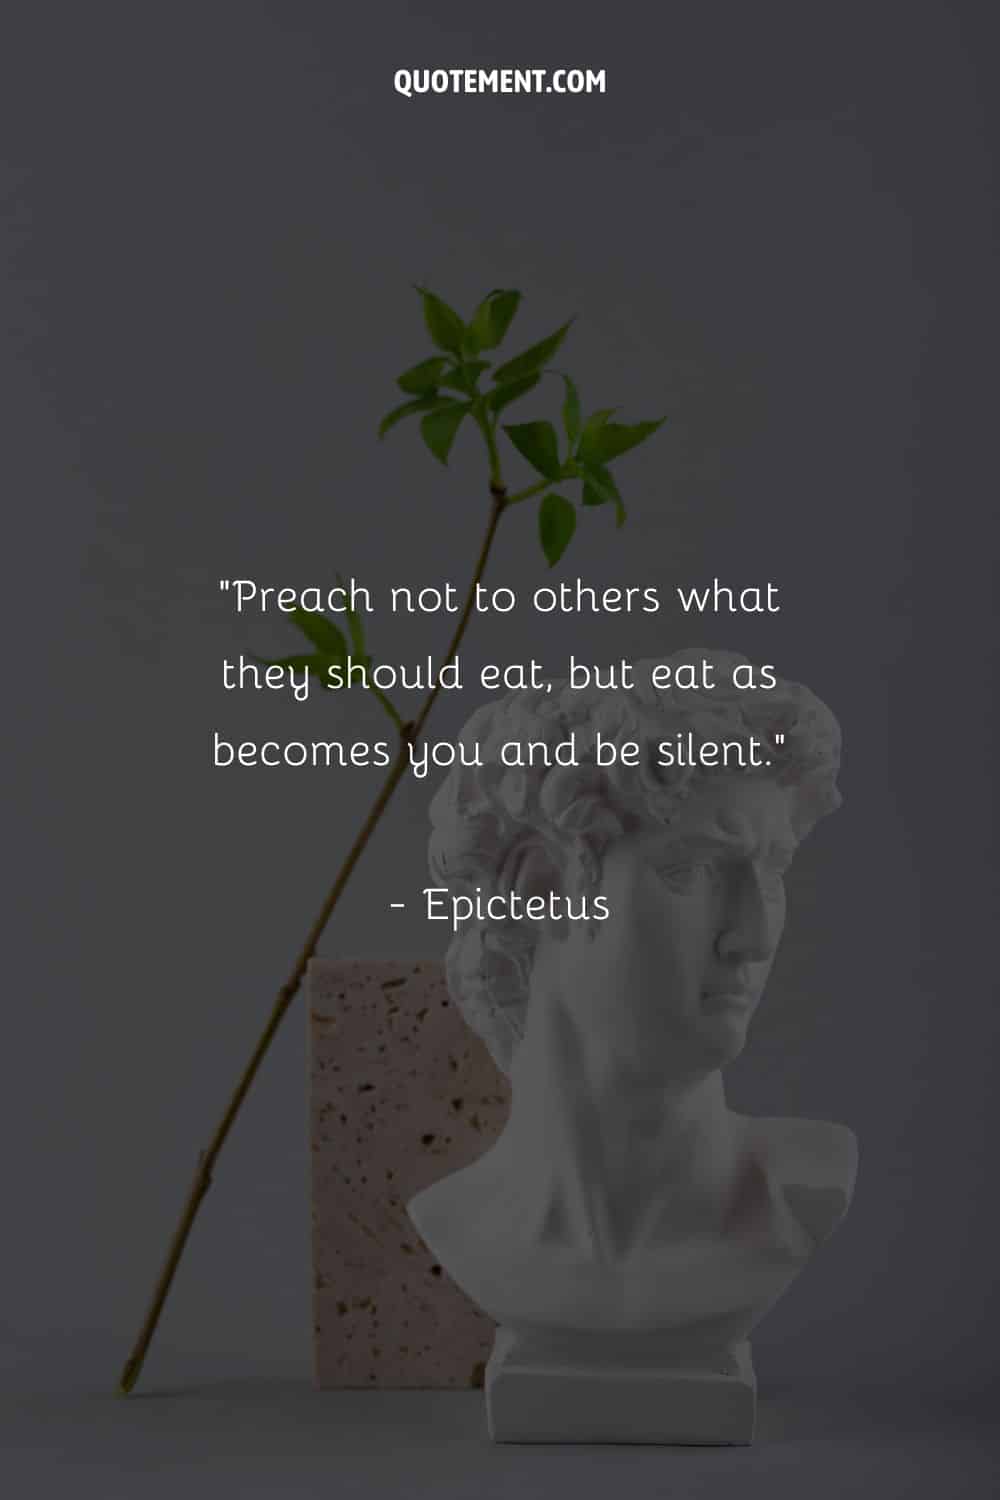 Preach not to others what they should eat, but eat as becomes you and be silent